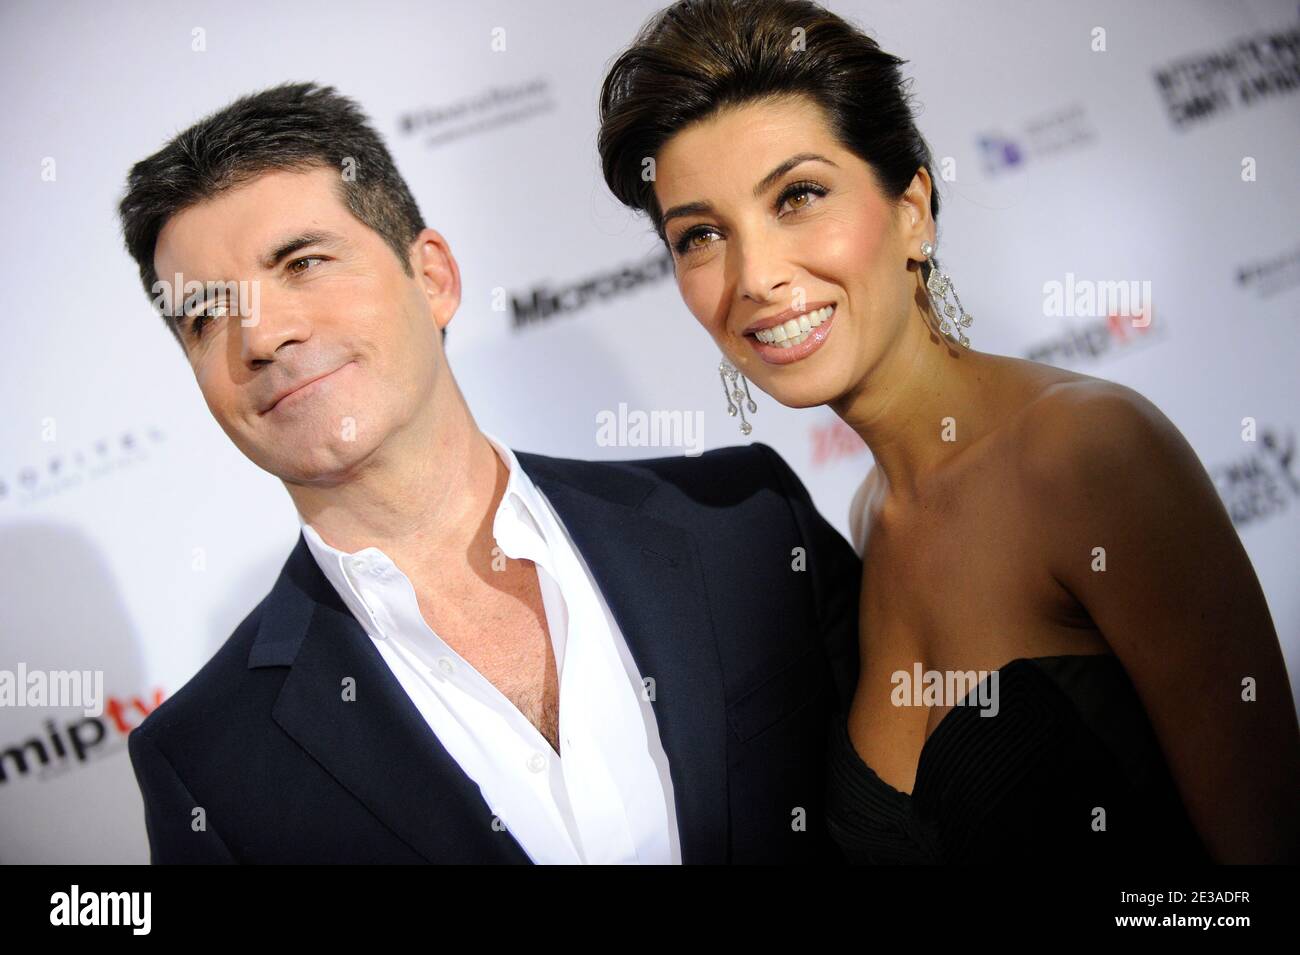 British television producer Simon Cowell and fiancee Mezhgan Hussainy  arriving for the 2010 International Emmy Awards